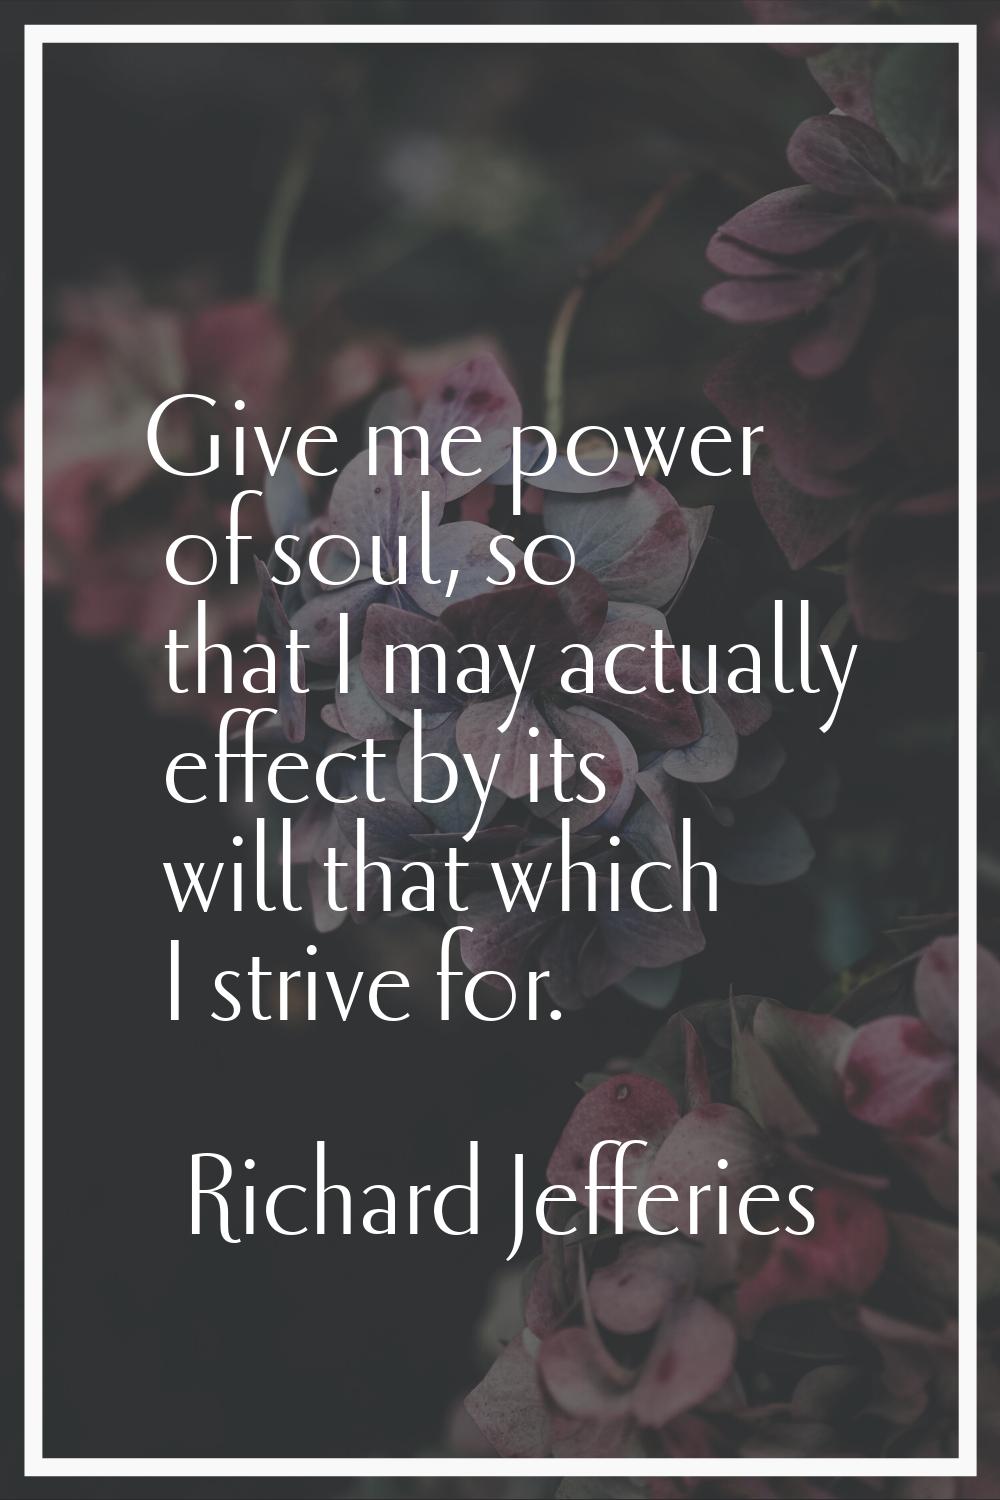 Give me power of soul, so that I may actually effect by its will that which I strive for.